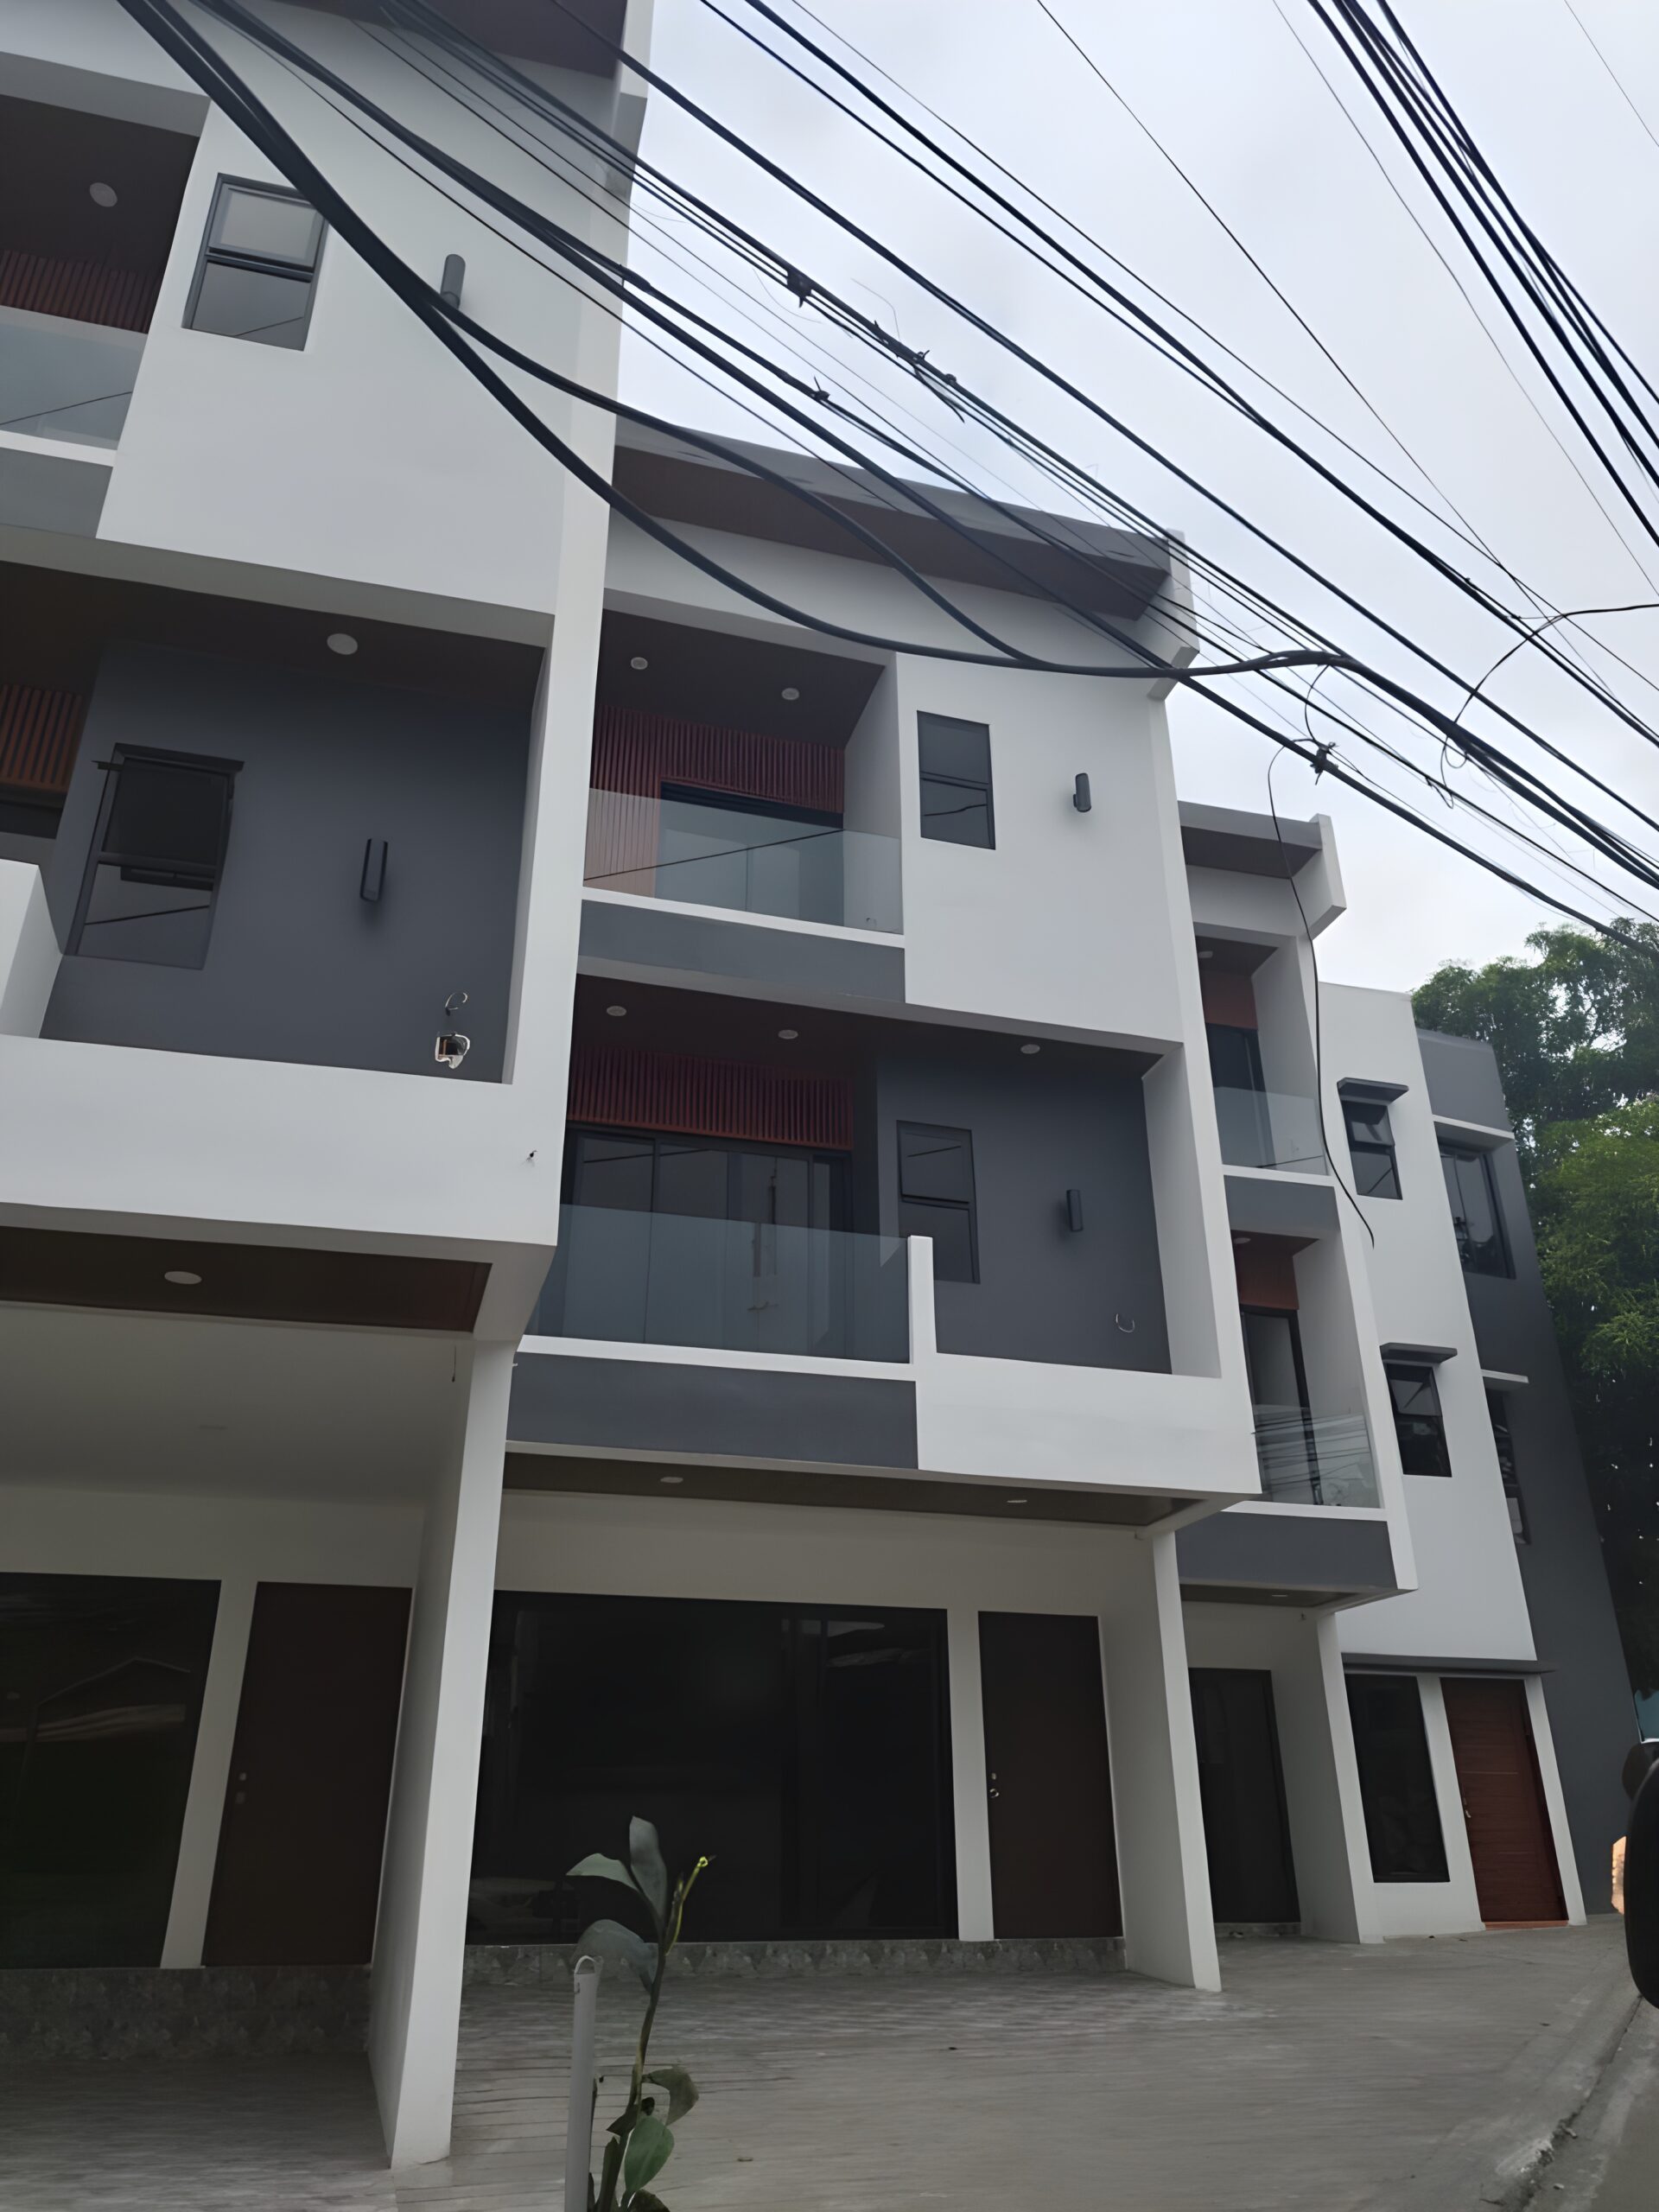 Brand New 3 Storey Townhouse with 3 Bedrooms FOR SALE in Sauyo Quezon City PH2892